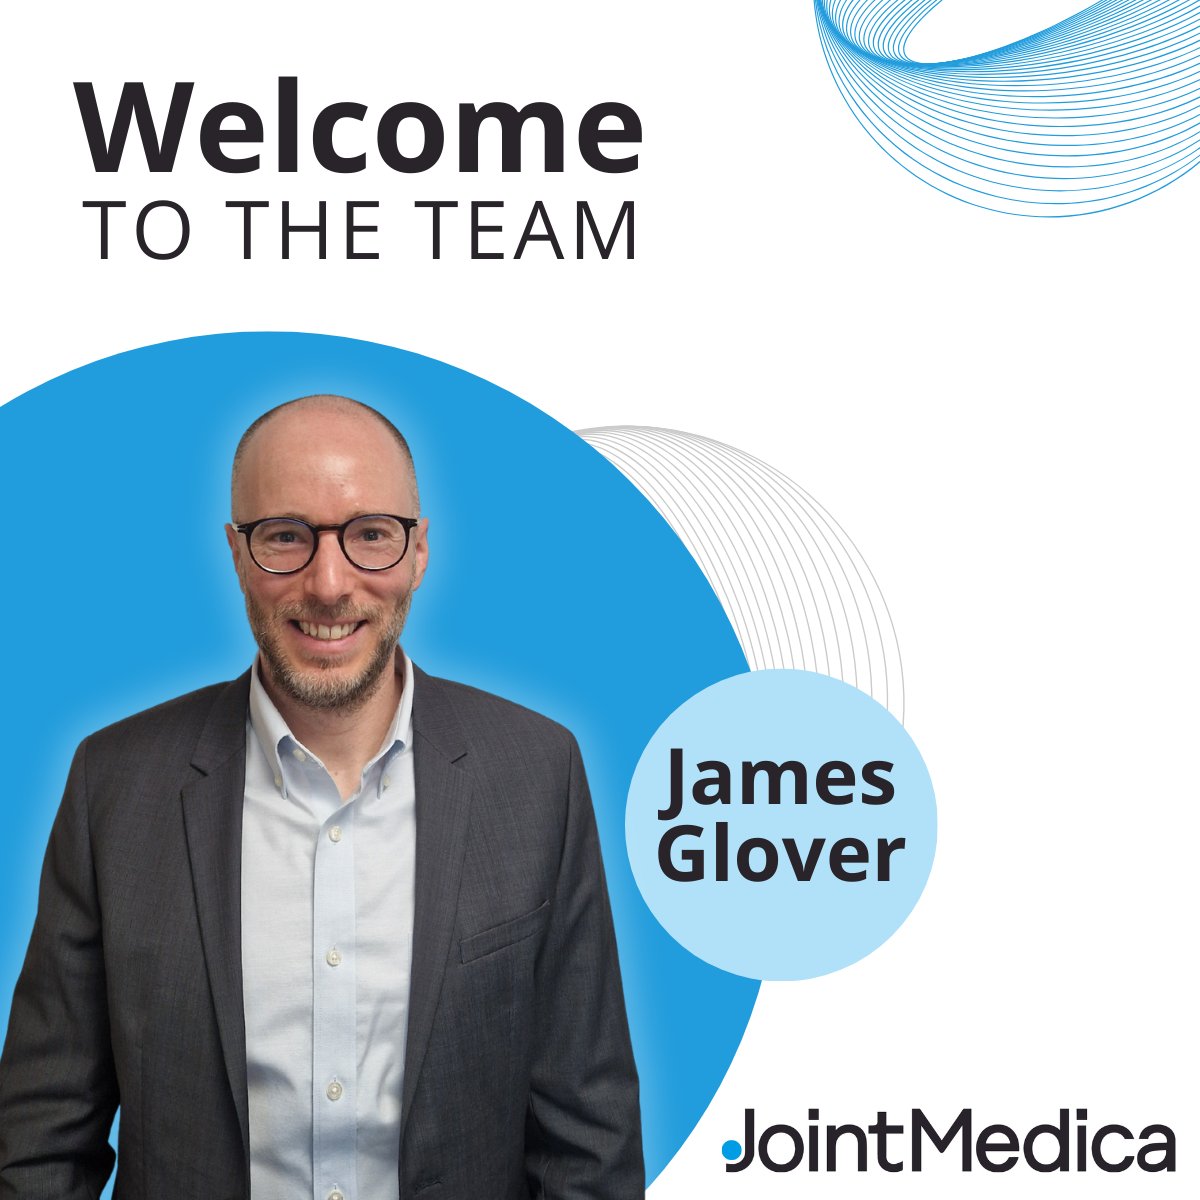 Each week brings a new addition to our team! We are delighted to introduce James Glover, who joins us as our Senior Development Engineer. James has over 18 years of experience in the orthopaedic industry, where he has contributed to the introduction of new implant systems and